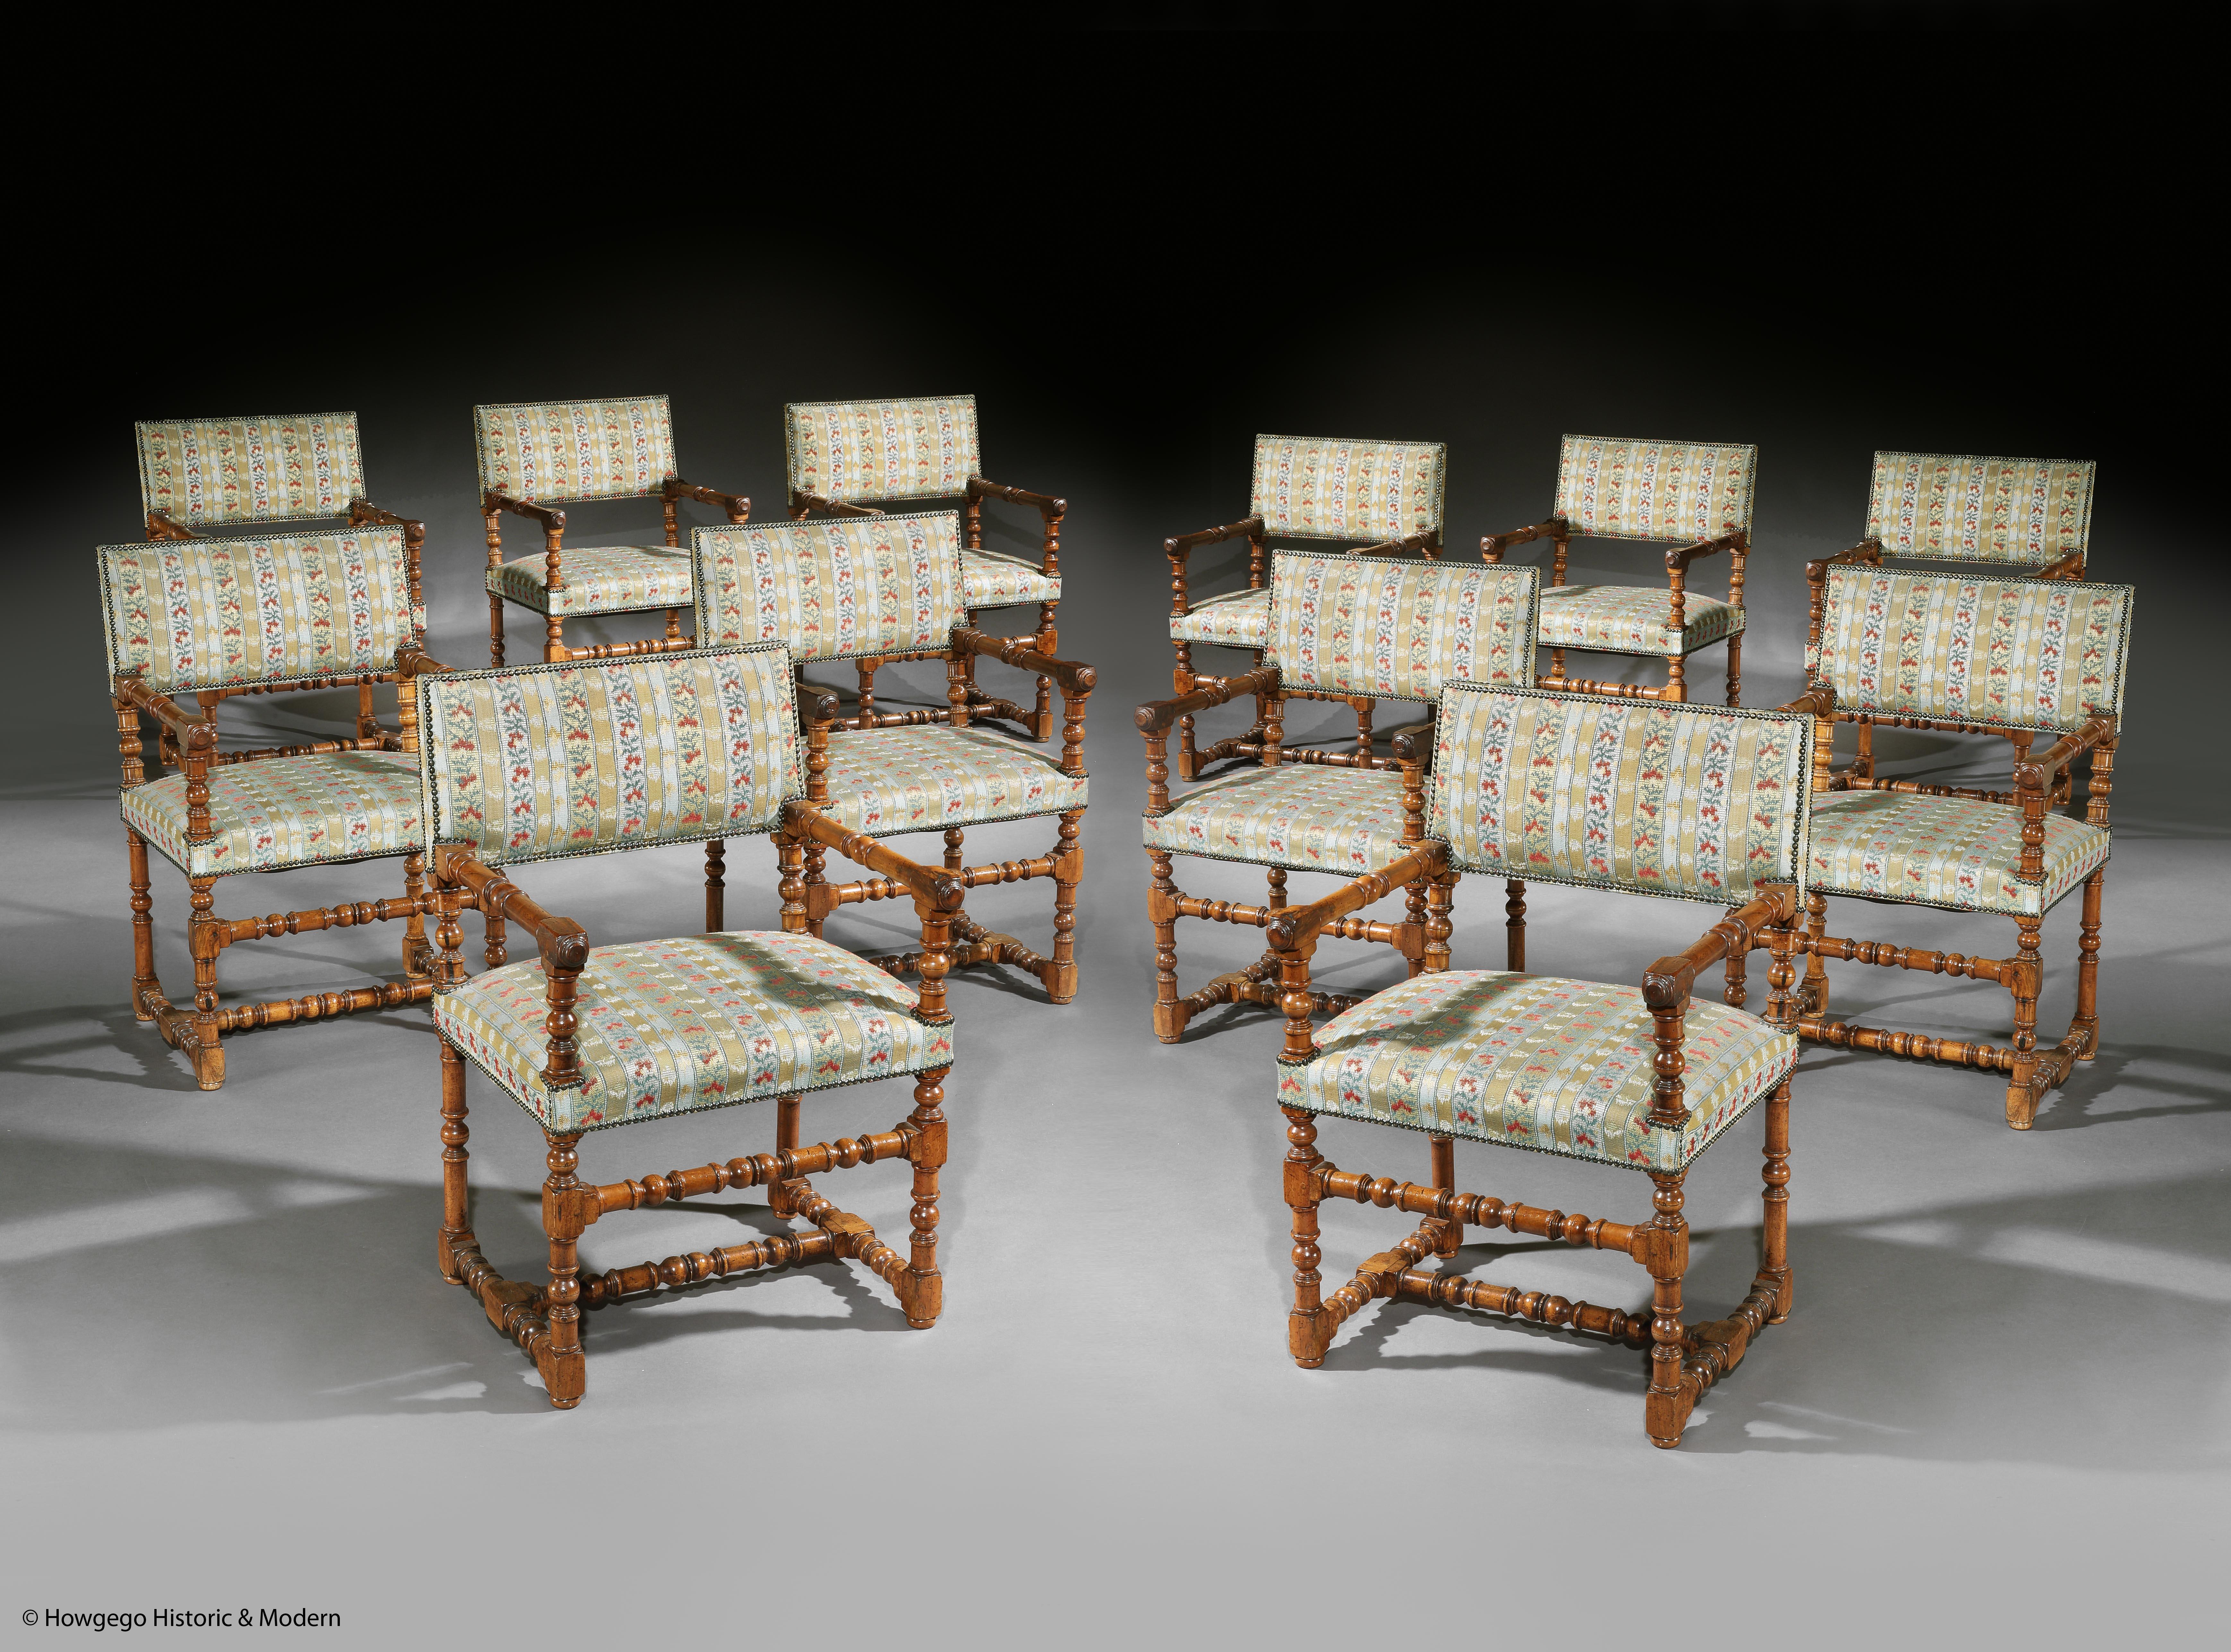 A rare long set of 12, Antiquarian, Renaissance-style, Fruitwood, Upholstered, Open Armchairs

- Rare to find a set of 12 of a Renaissance-style armchair, in 35 years of dealing I have not come across a set of this model
- The model evolved from